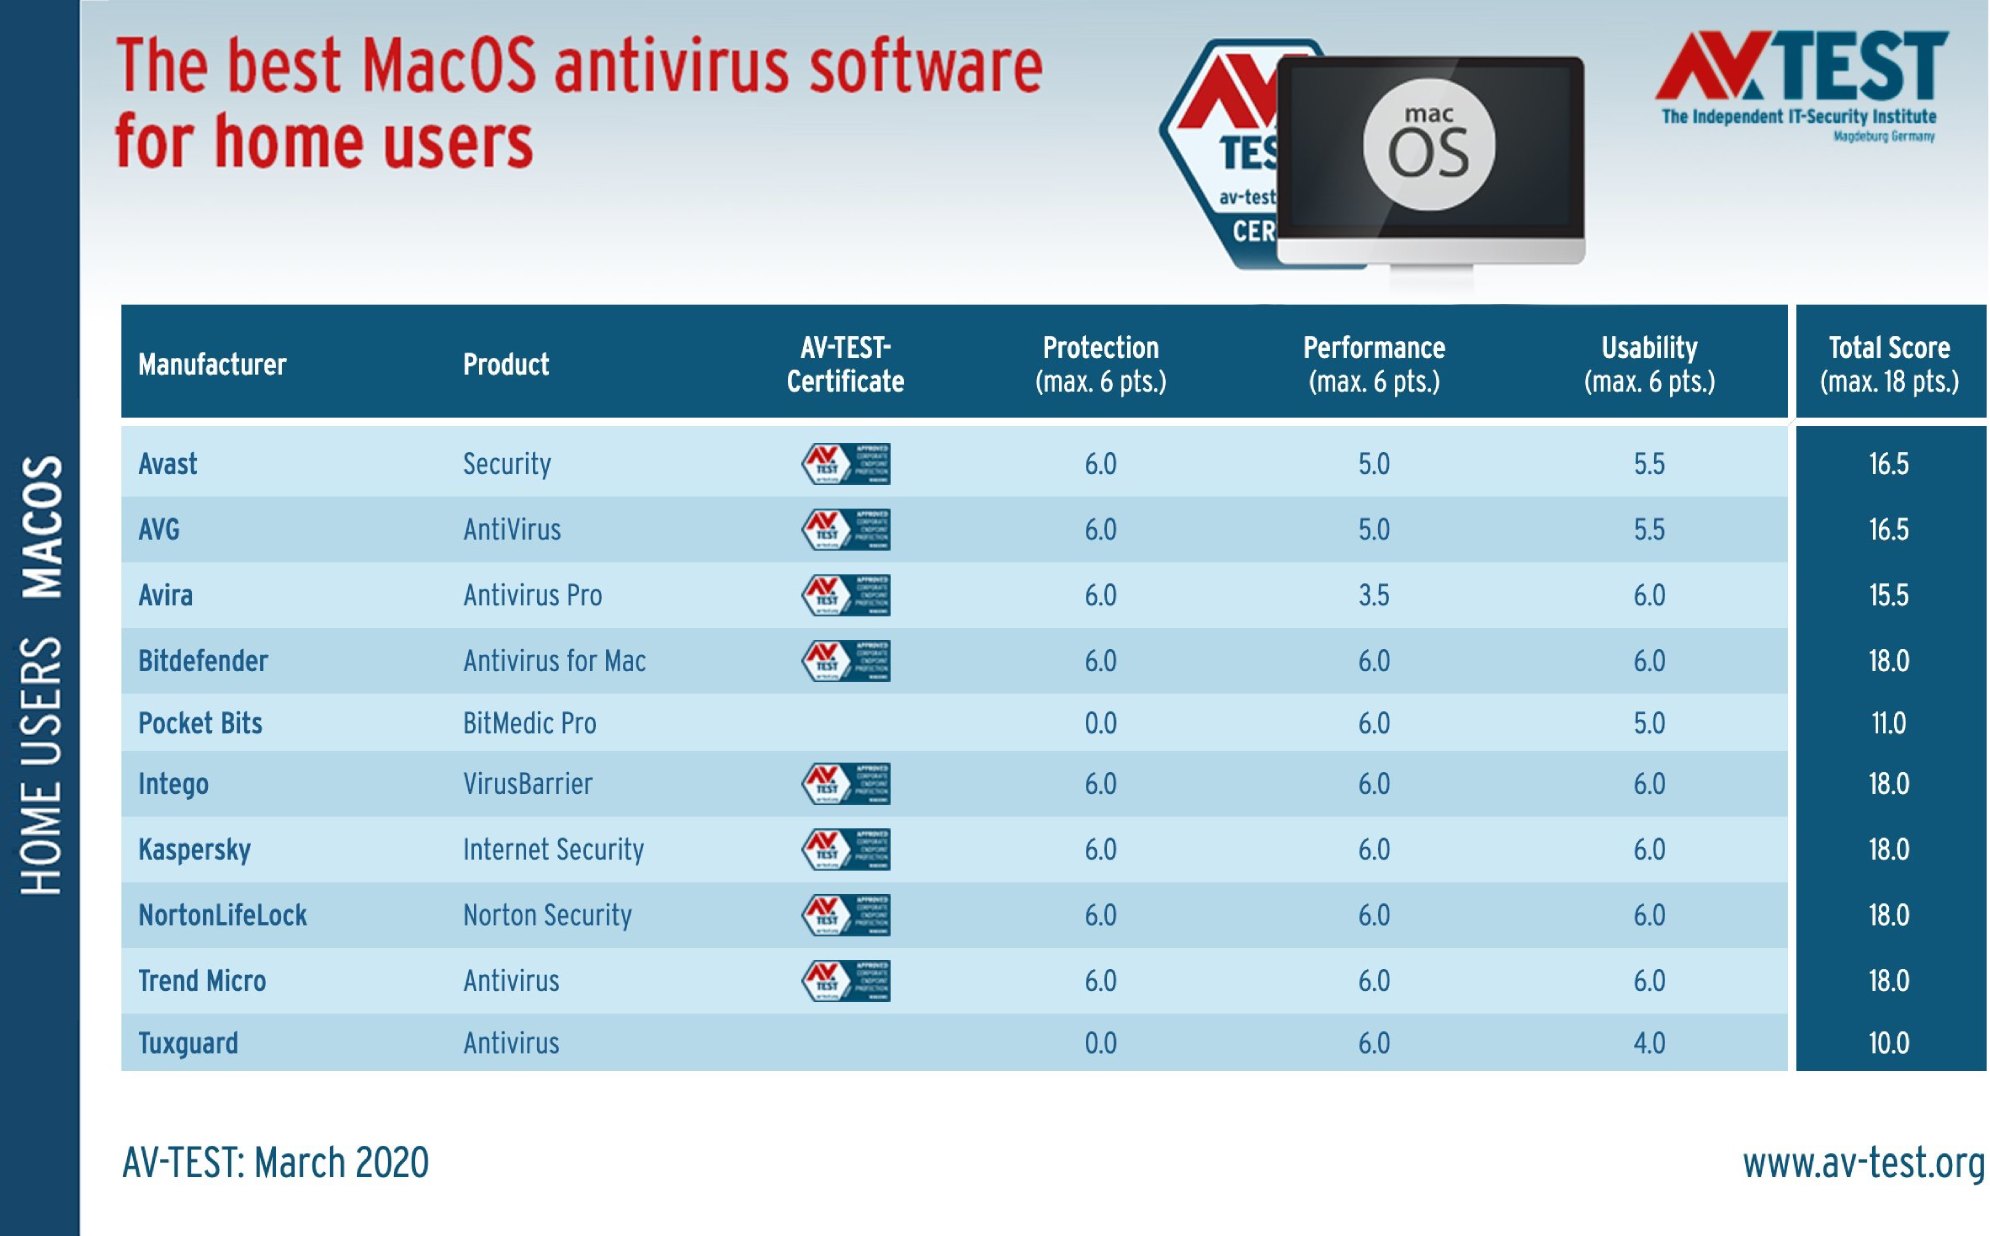 what is the best antivirus software for a mac computer